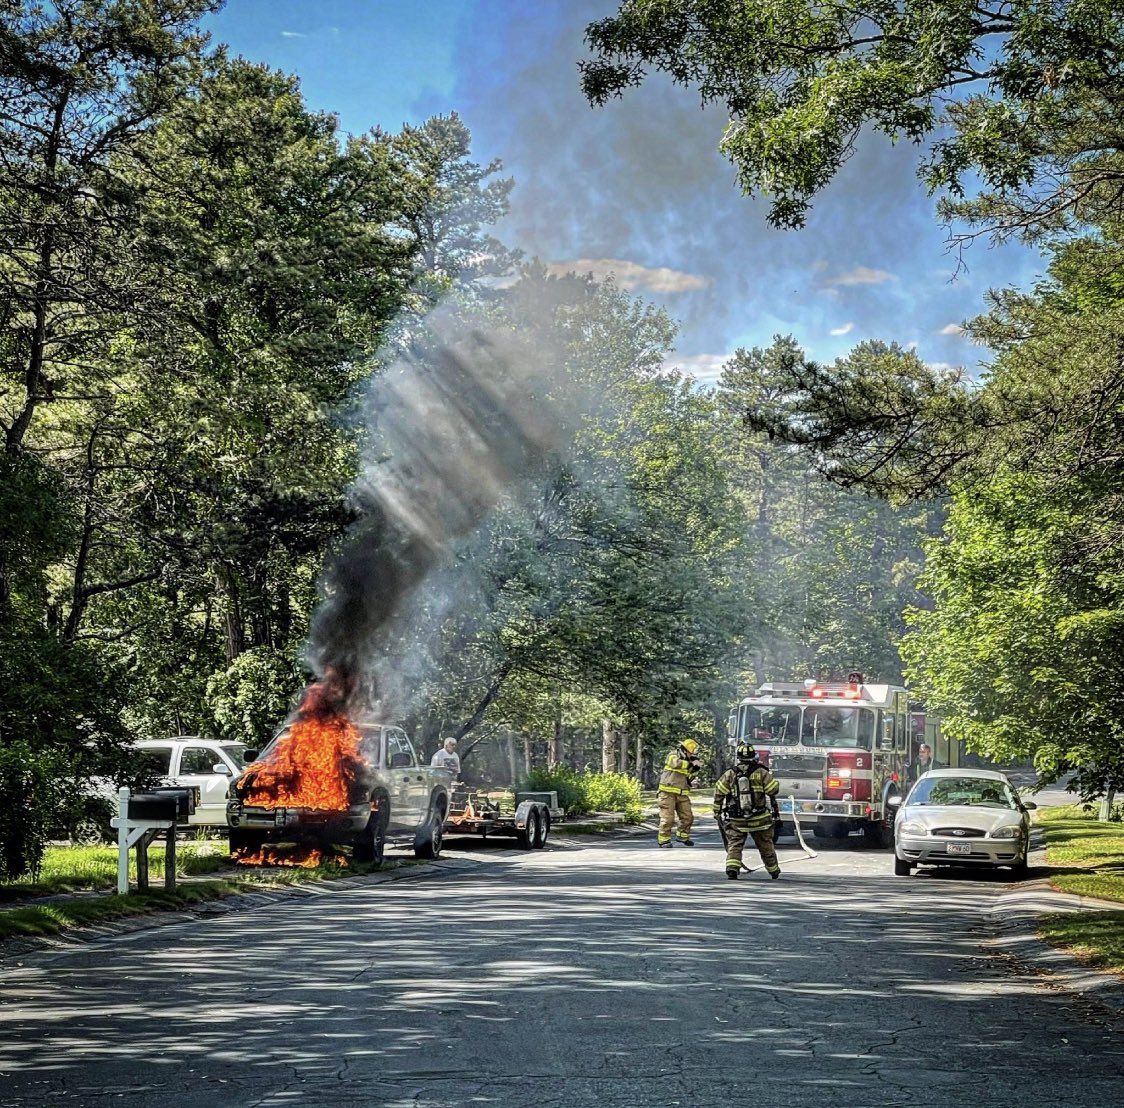 NEW: @PlymouthFireDpt Engine 2 also battled this truck fire in West Plymouth today @EdBradl88480009 https://t.co/RKjRcfhYCG